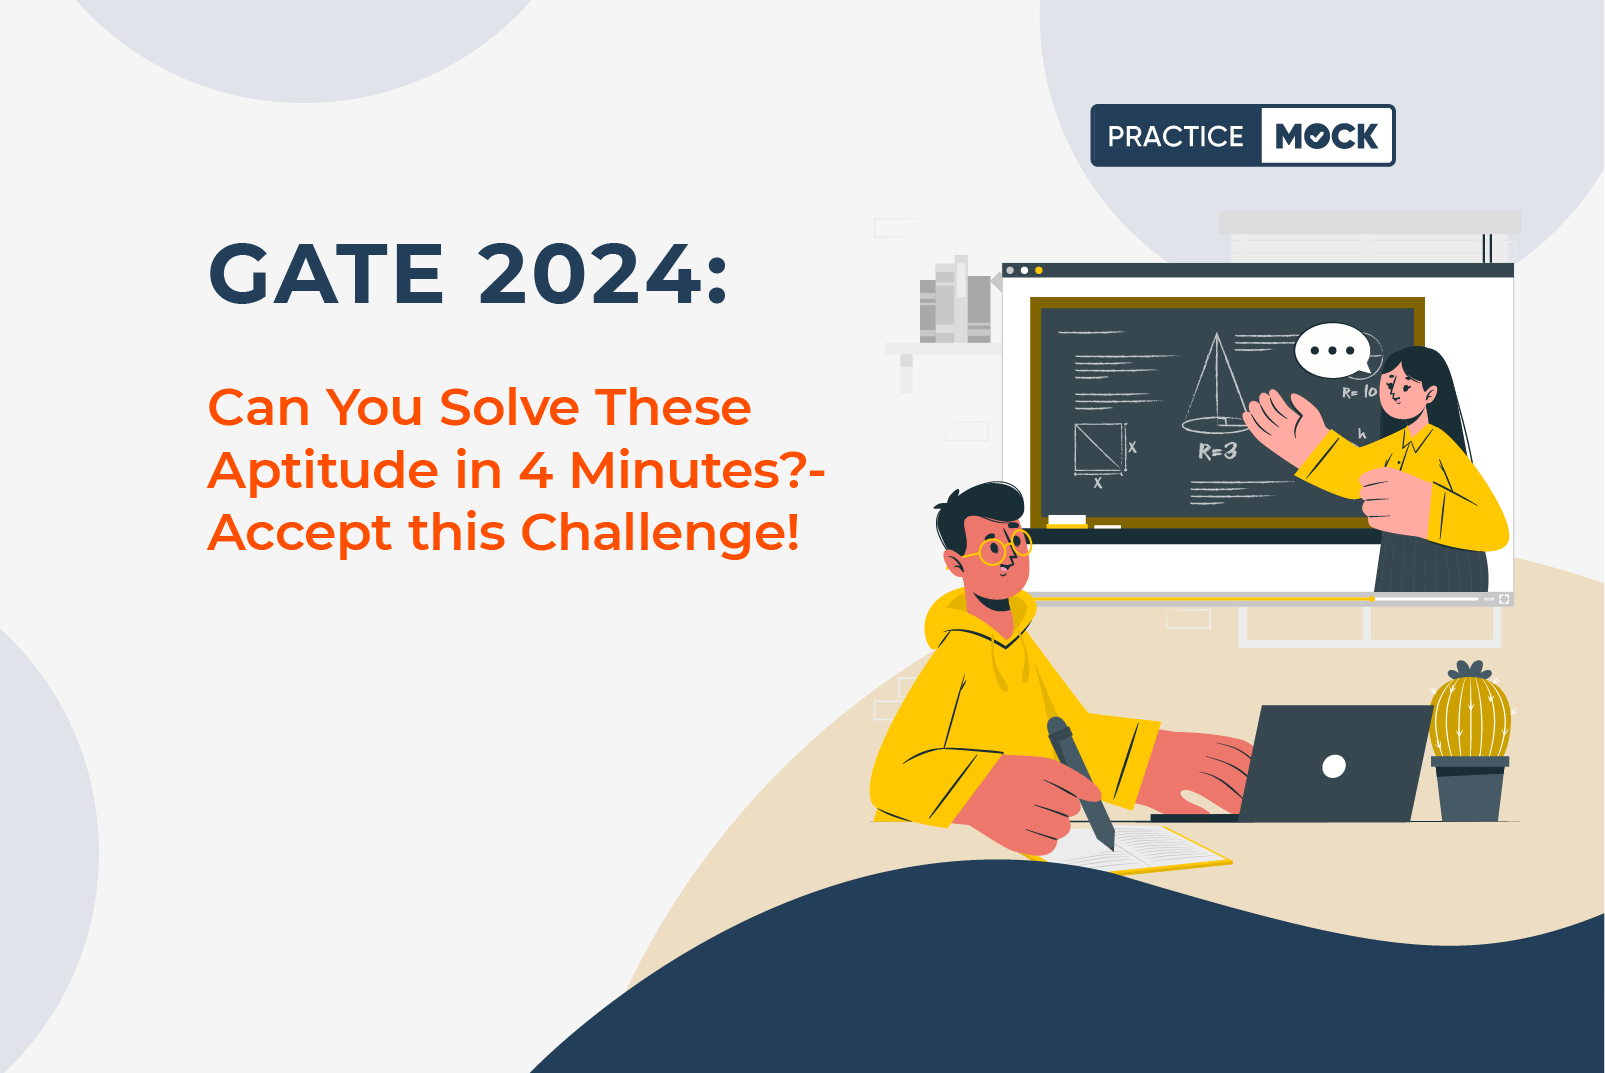 GATE 2024: Can You Solve These Aptitude Questions in 4 Minutes?-Accept this Challenge!